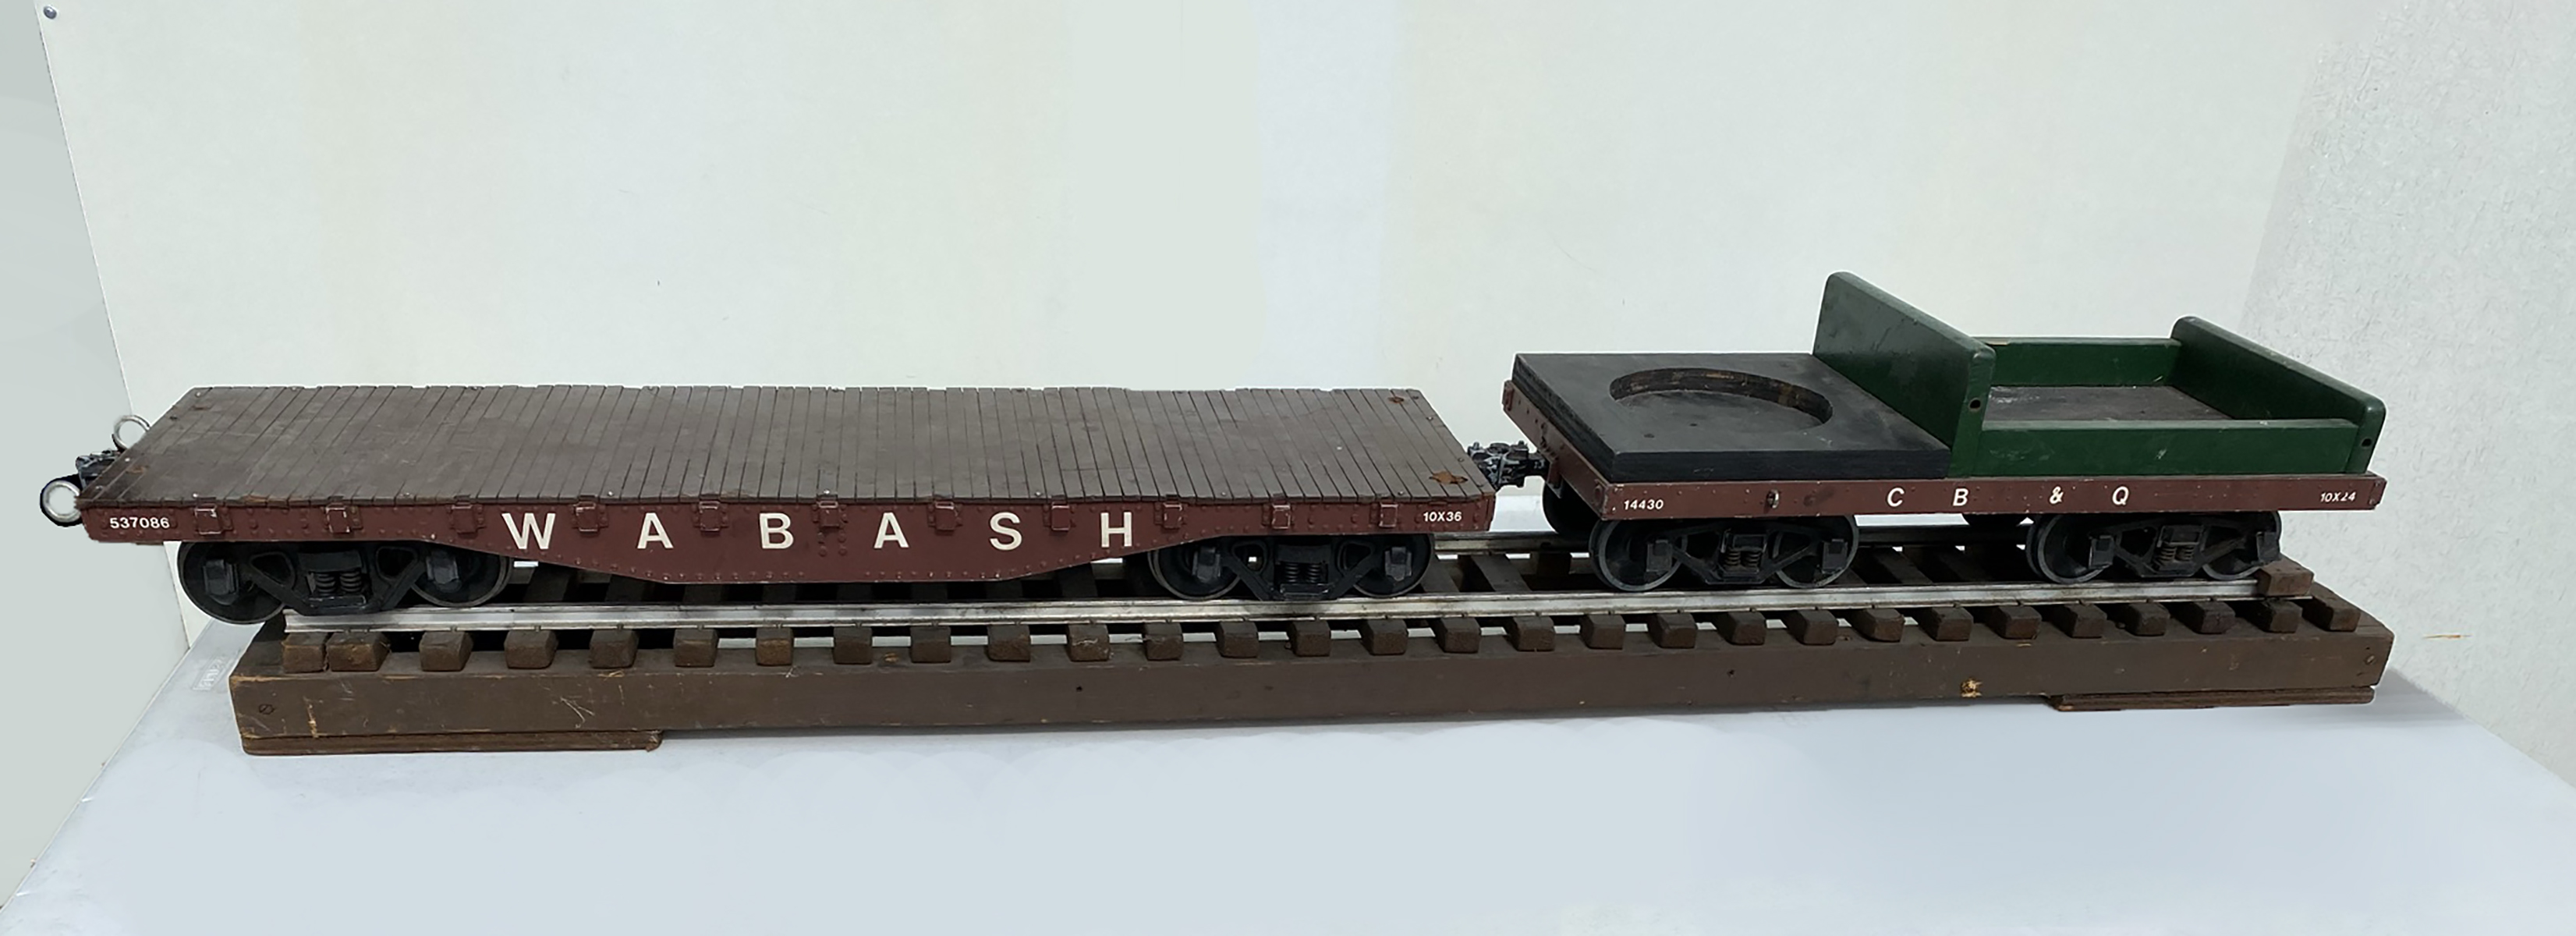 OLD SCALE MODEL RAILWAY CARS AND TRACK